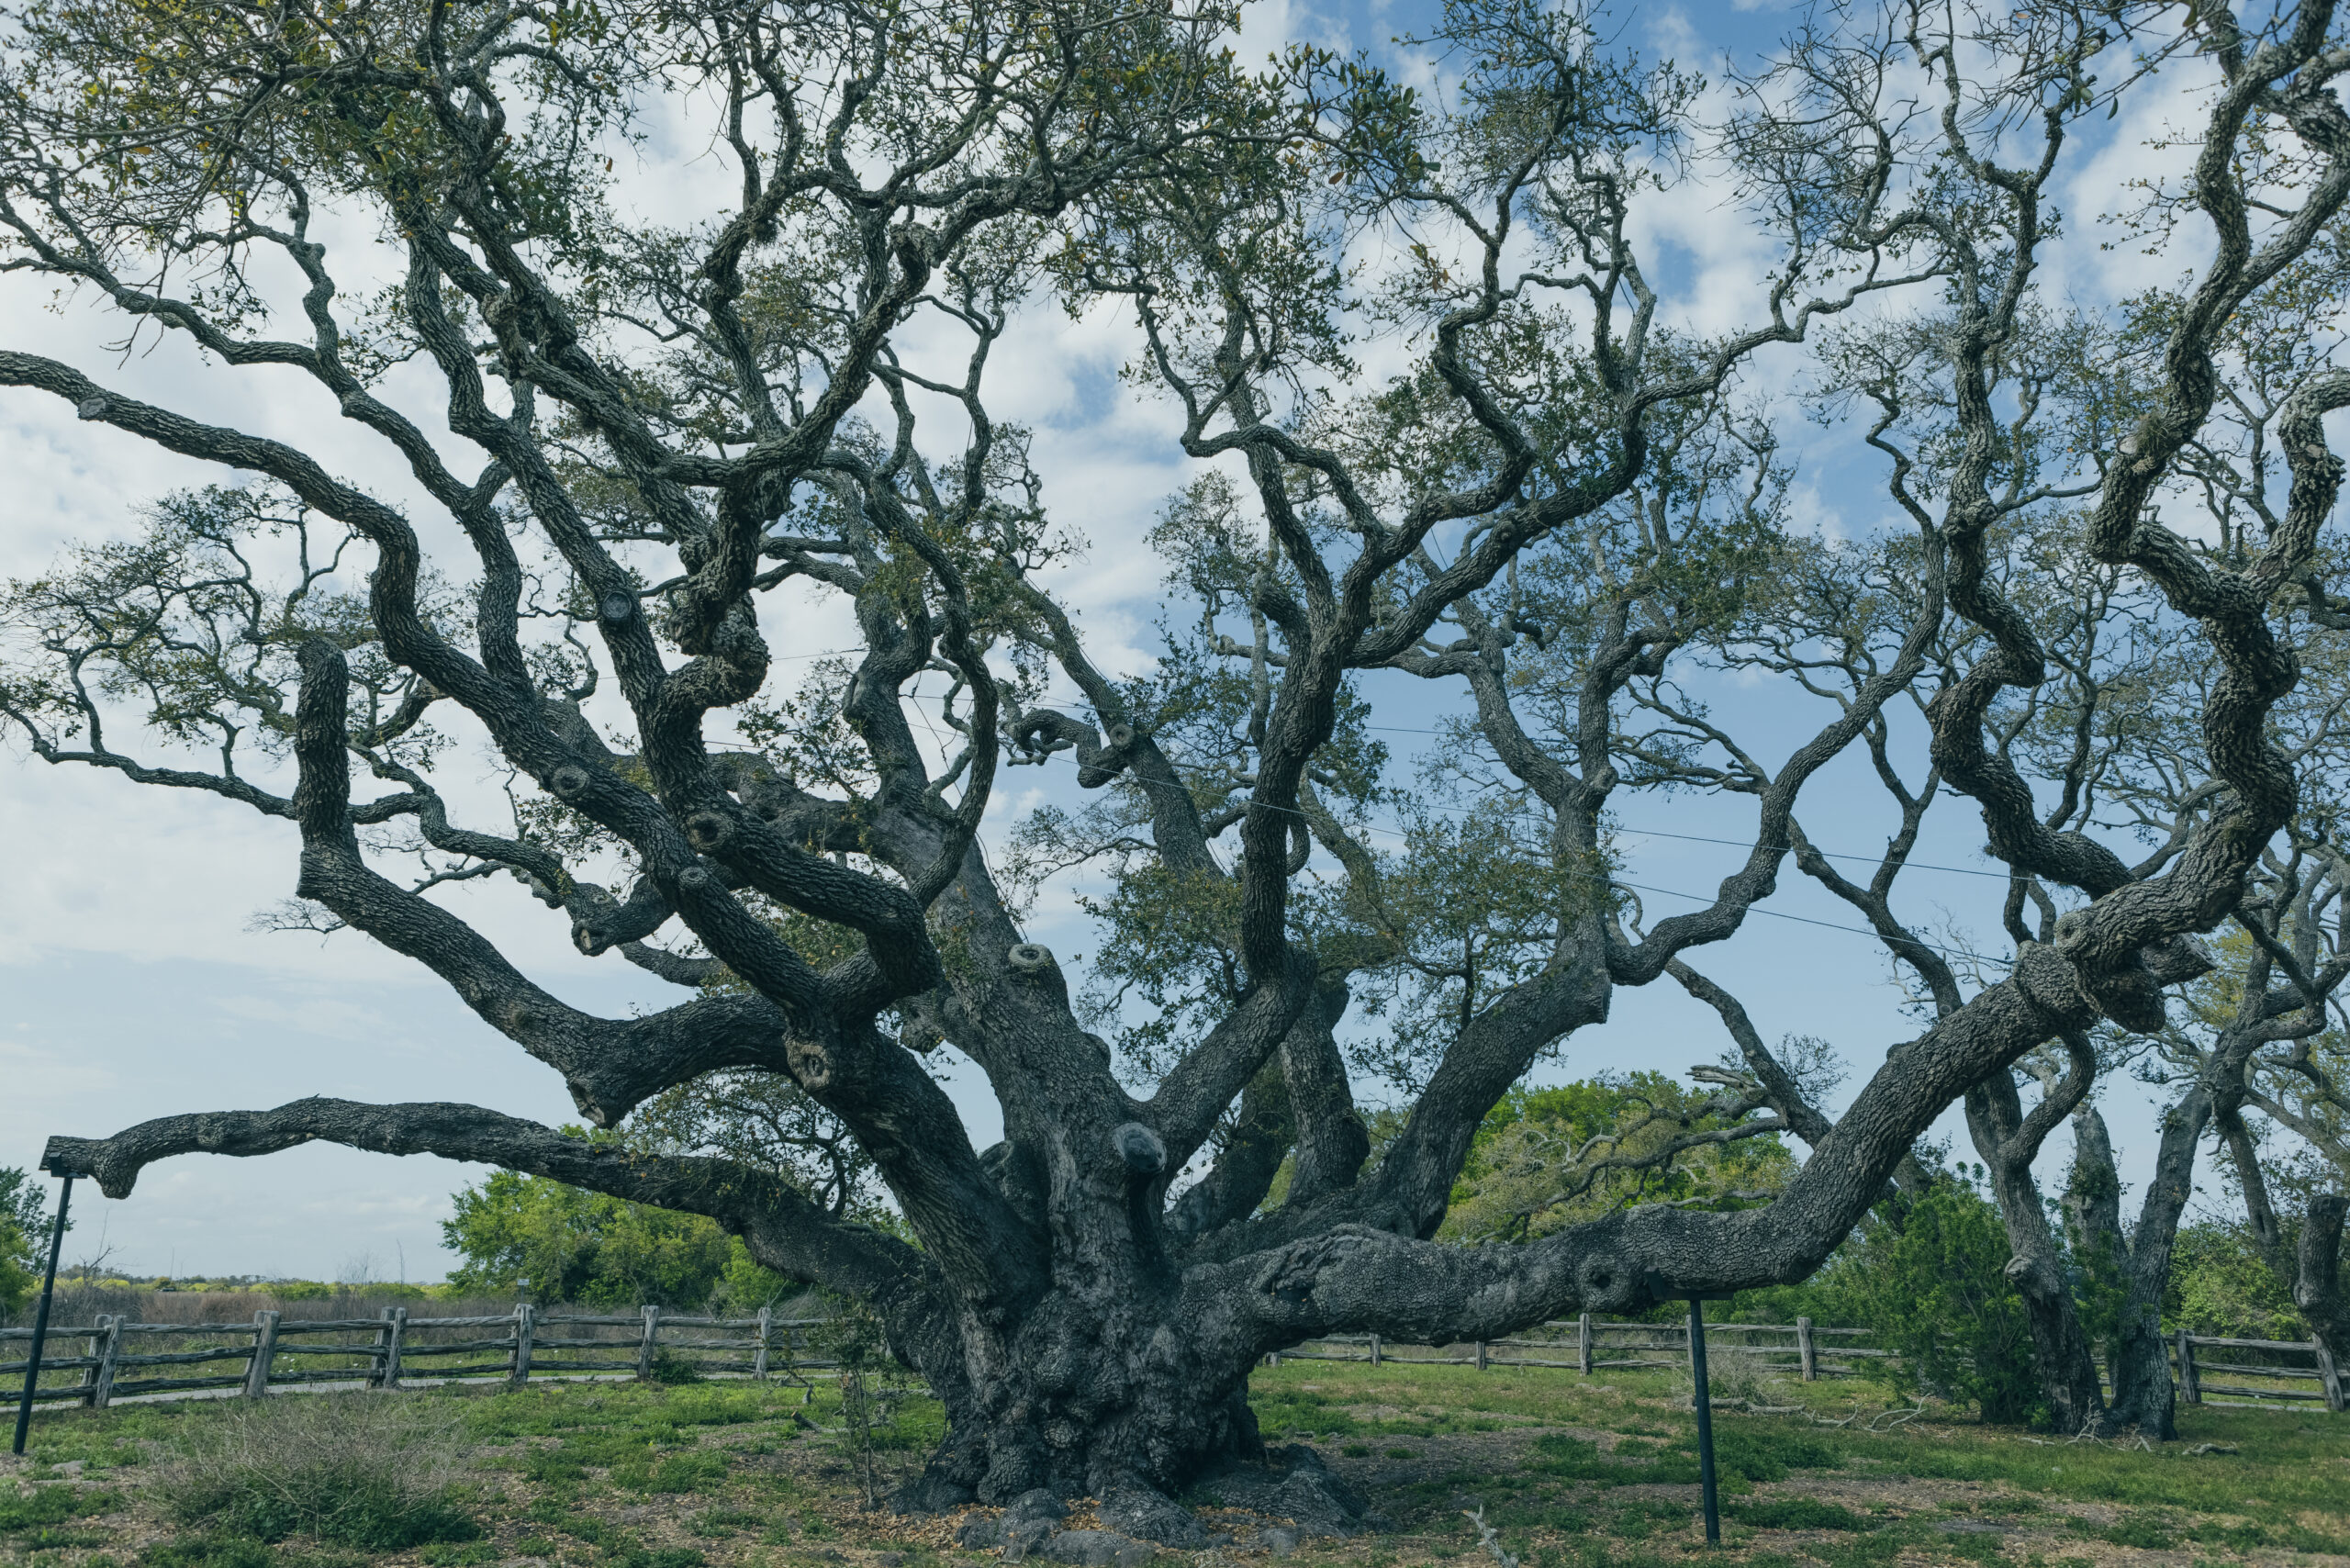 Don't wait another 1000 years to see this tree in Rockport, stay at Hidden Oak RV Resort